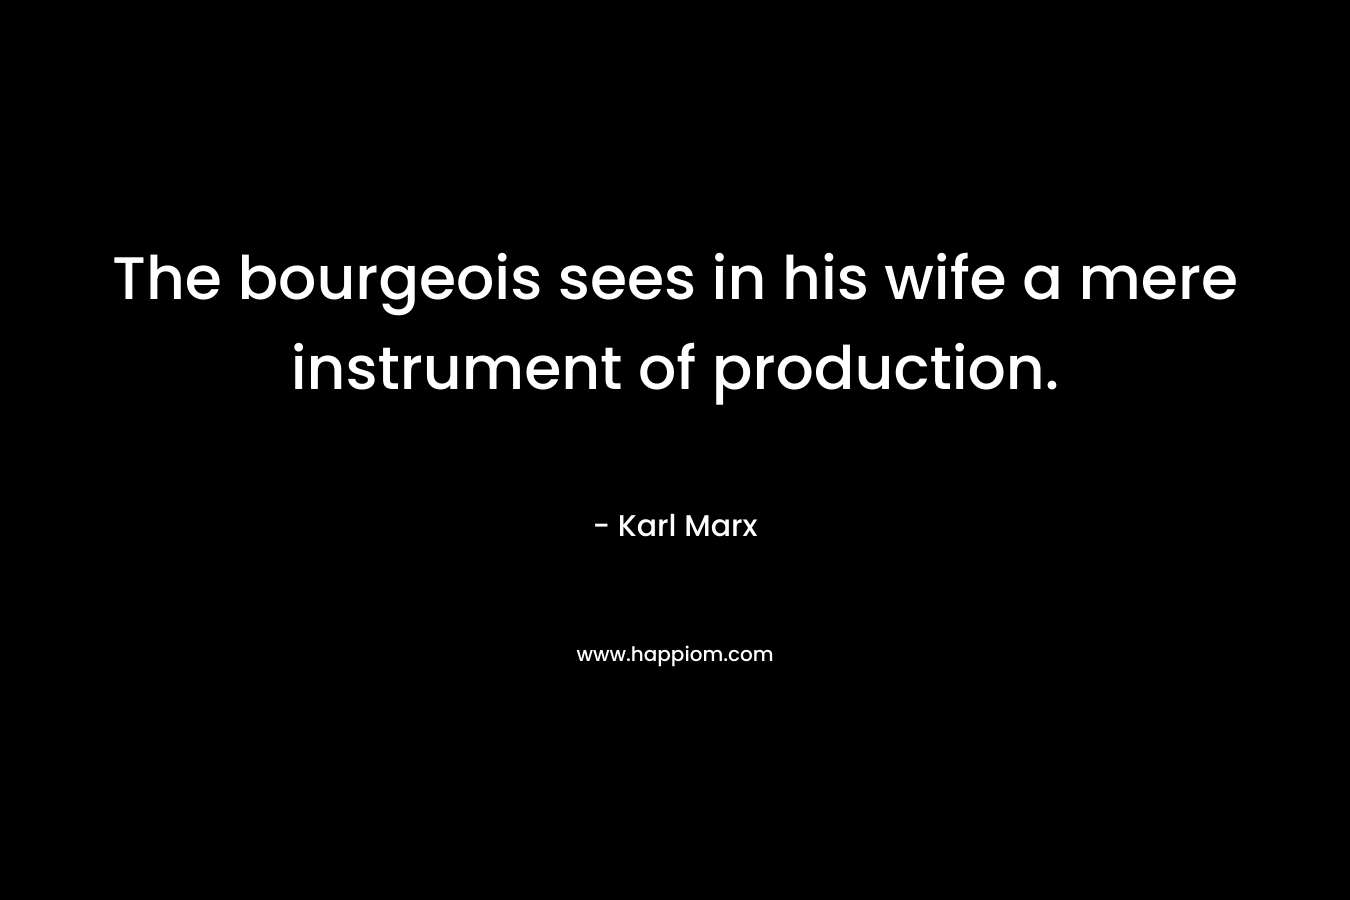 The bourgeois sees in his wife a mere instrument of production.